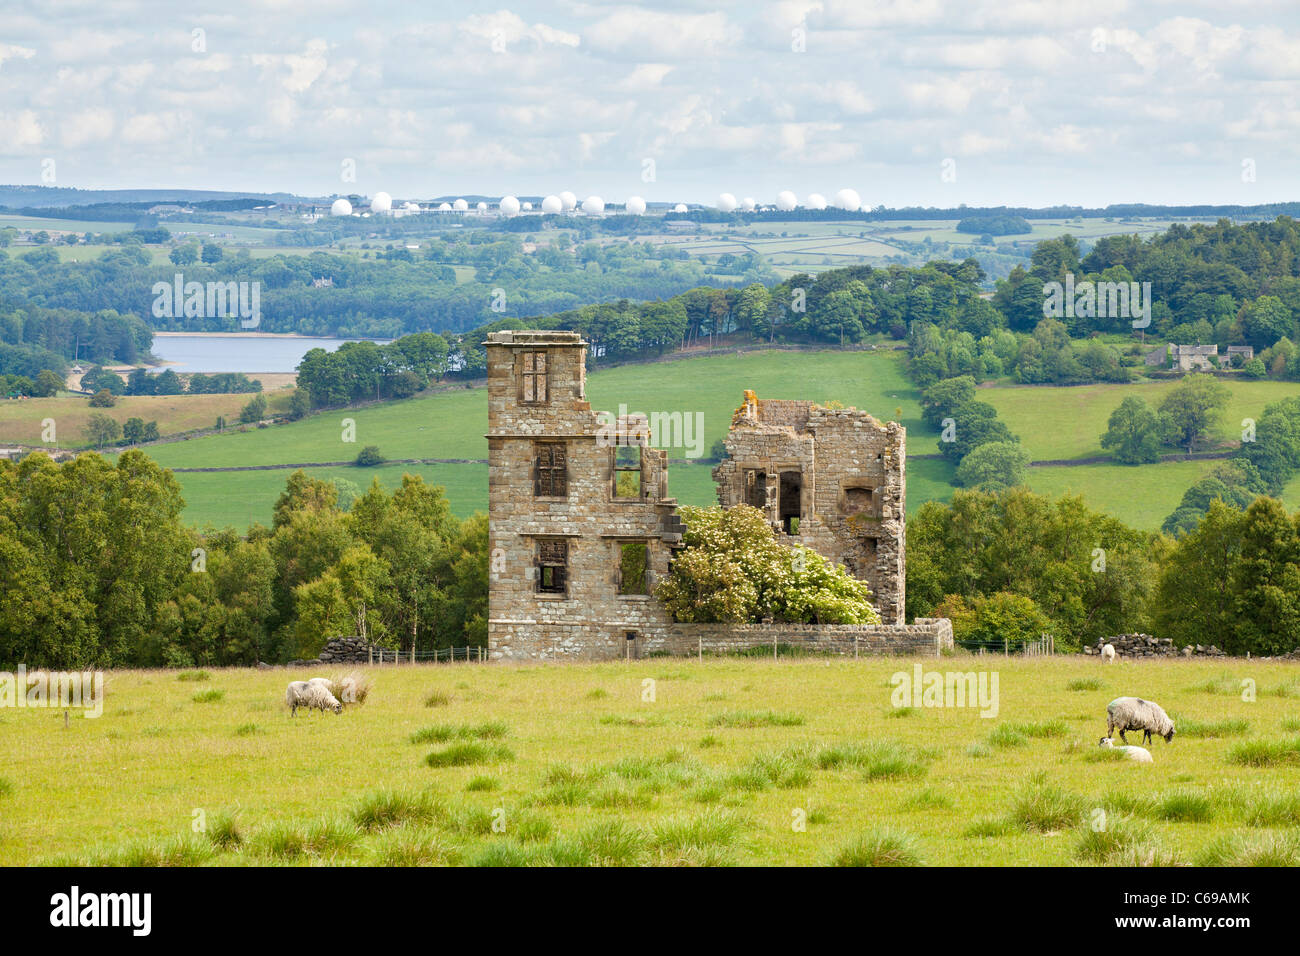 Dob Park Lodge now in ruins is an early 17th century lodge north of Otley, RAF Menwith Hill in the background, North Yorkshire. Stock Photo